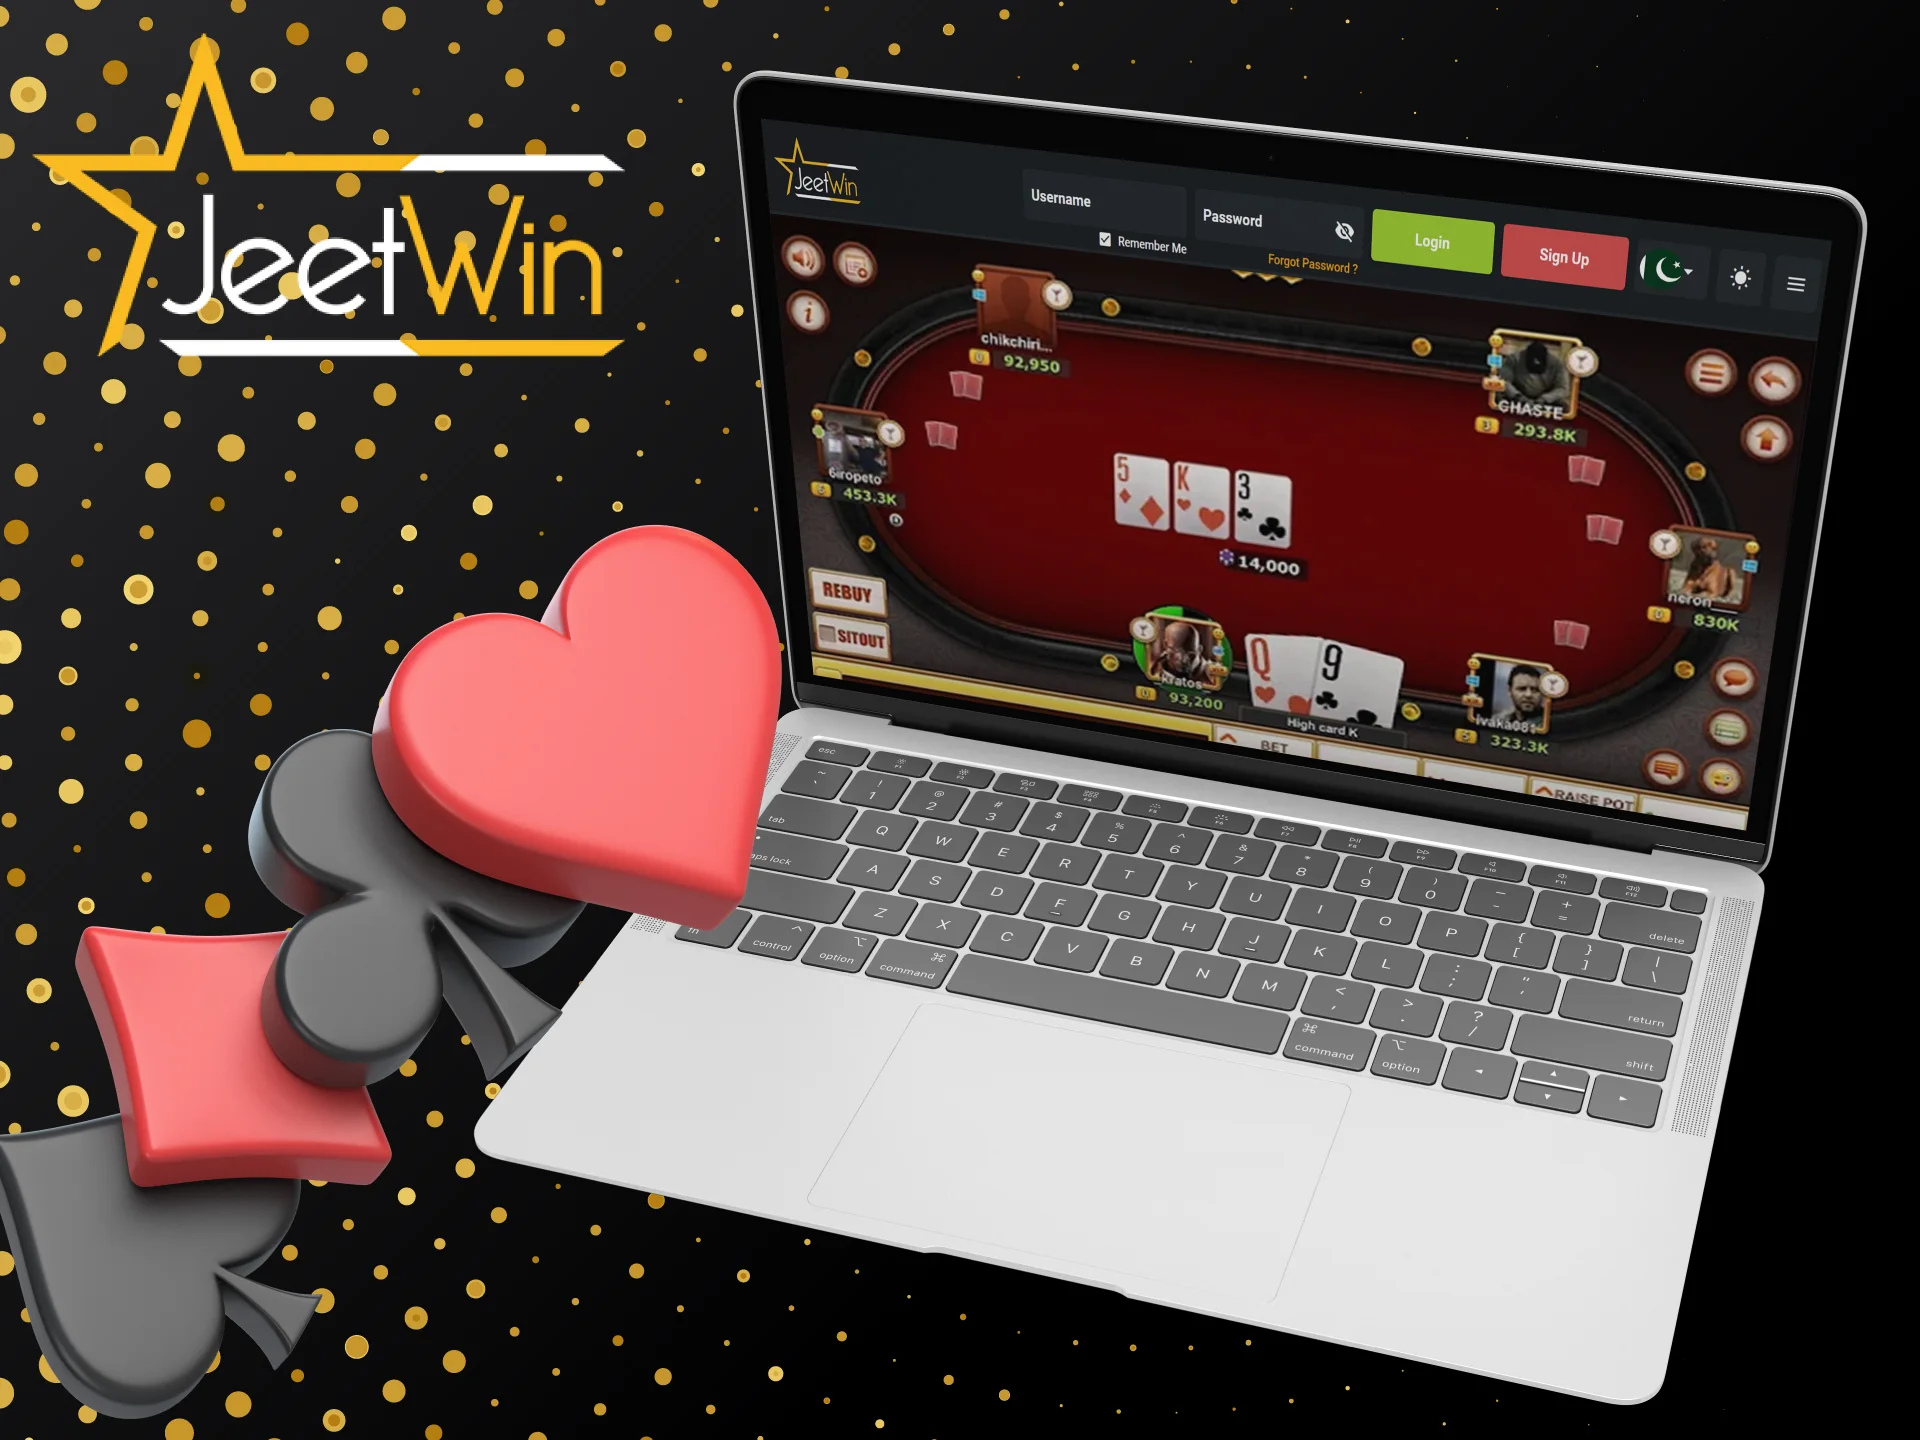 Play poker at JeetWin without risk using the demo mode.